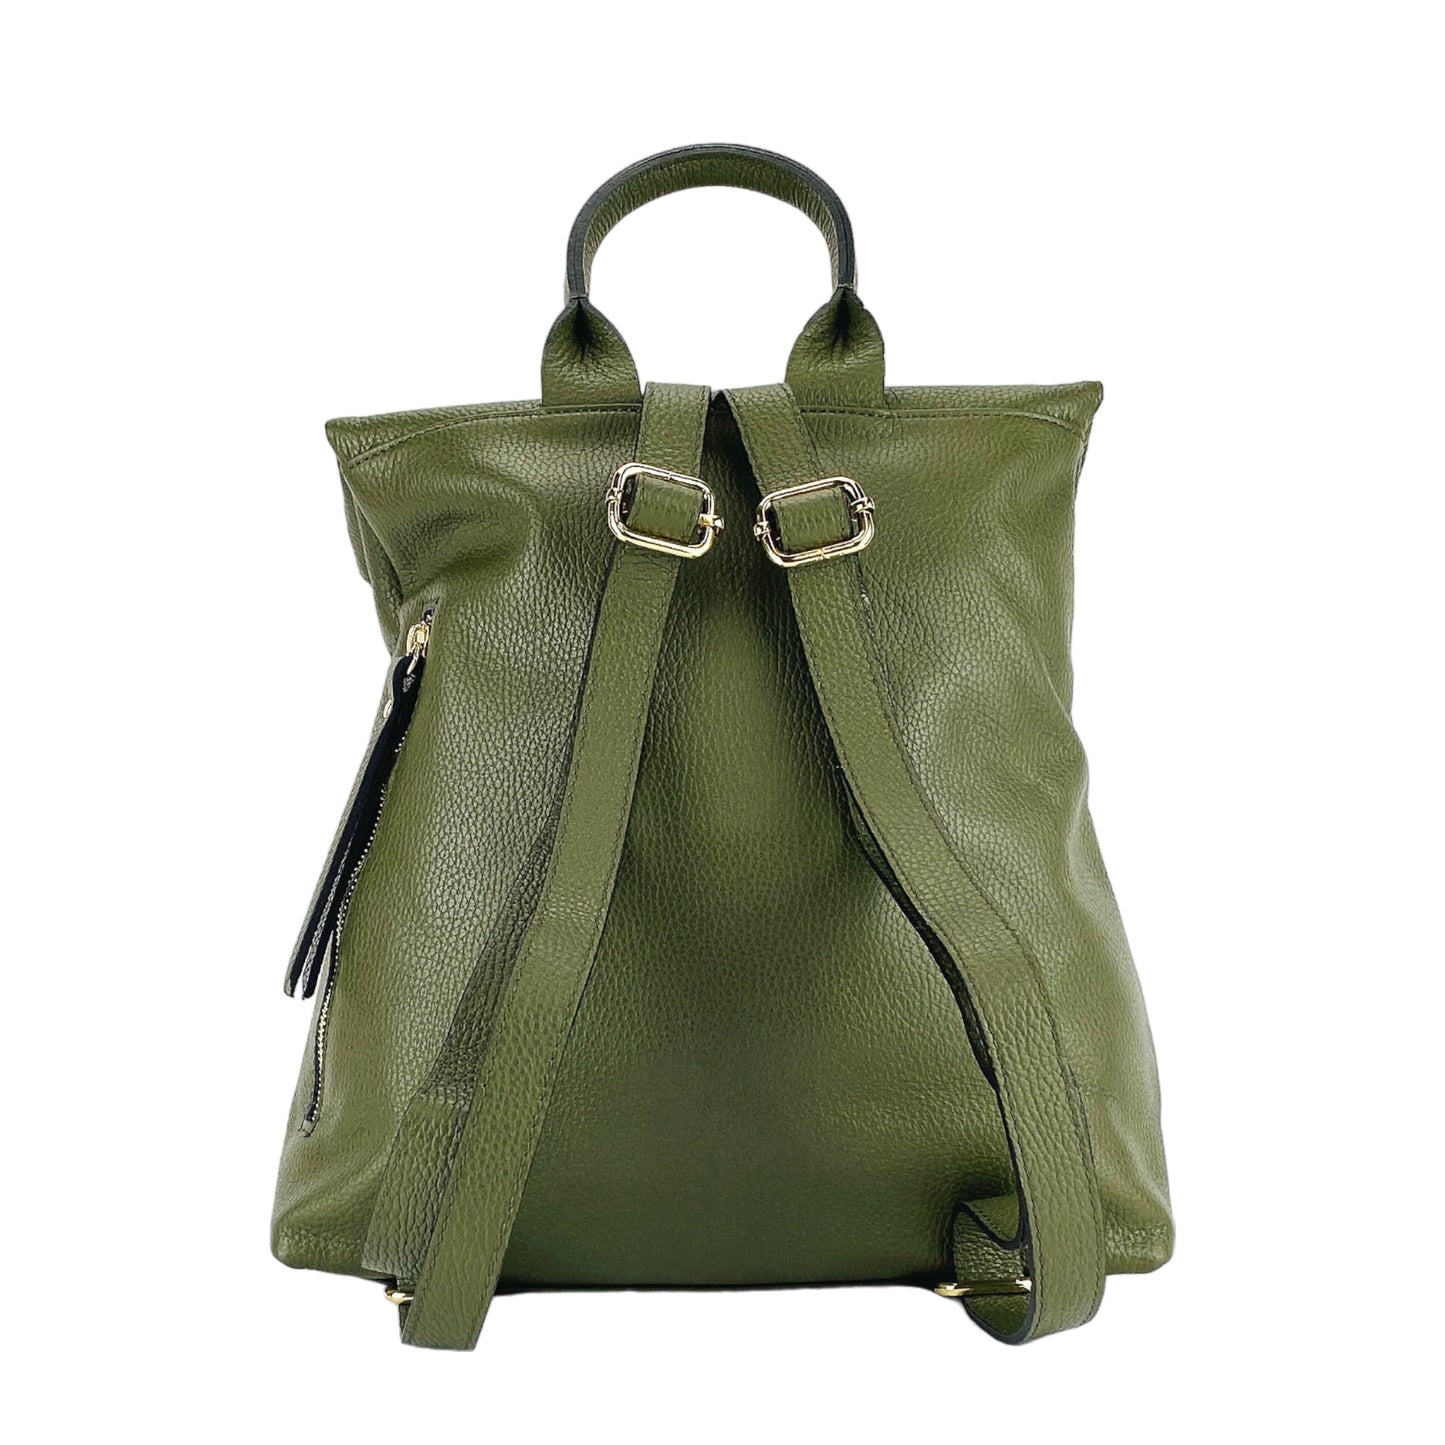 RB1021E | Soft women's backpack in genuine leather Made in Italy with adjustable shoulder straps. Zipper and accessories in shiny gold metal - Green color - Dimensions: 30 x 34 x 10.5 cm-4